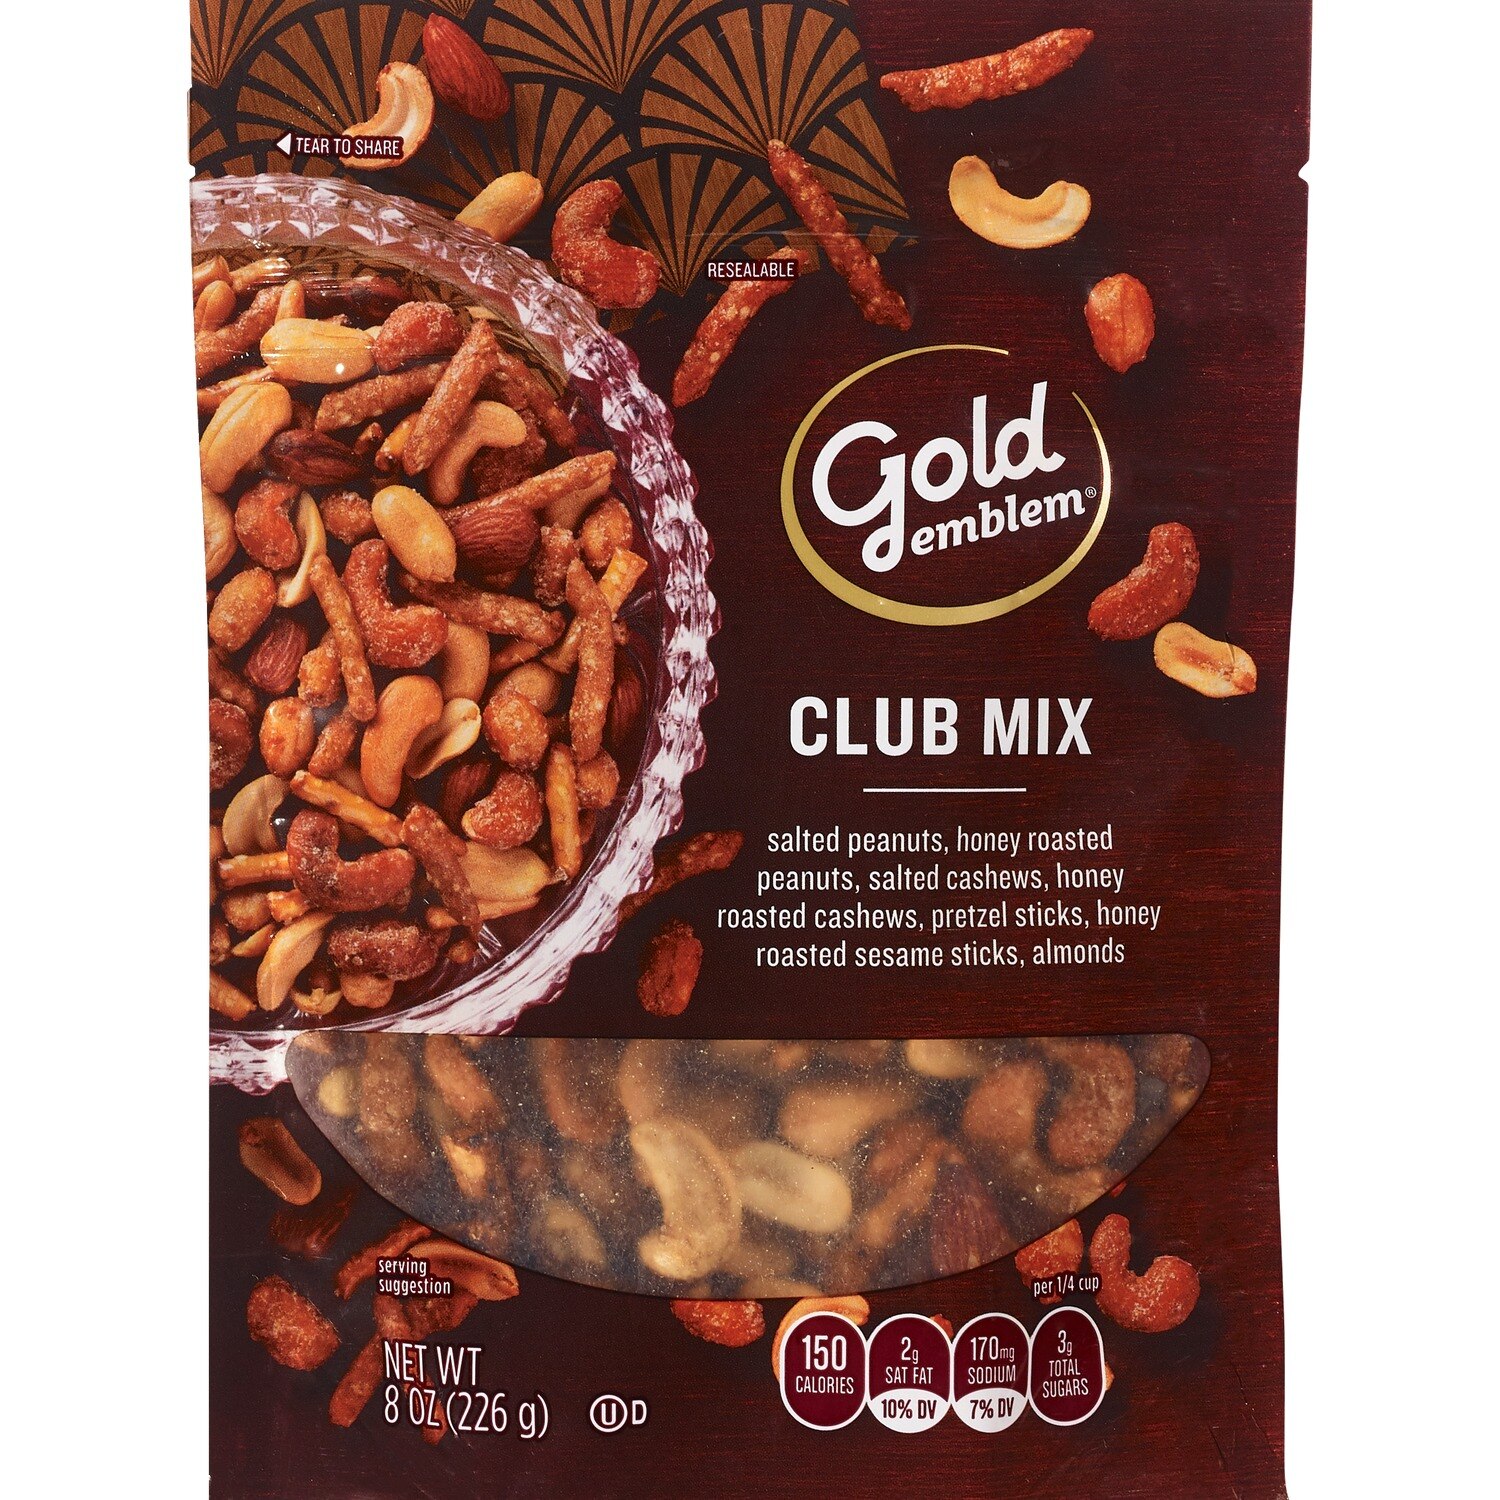 Gold Emblem Club Mix | Pick Up In Store TODAY at CVS